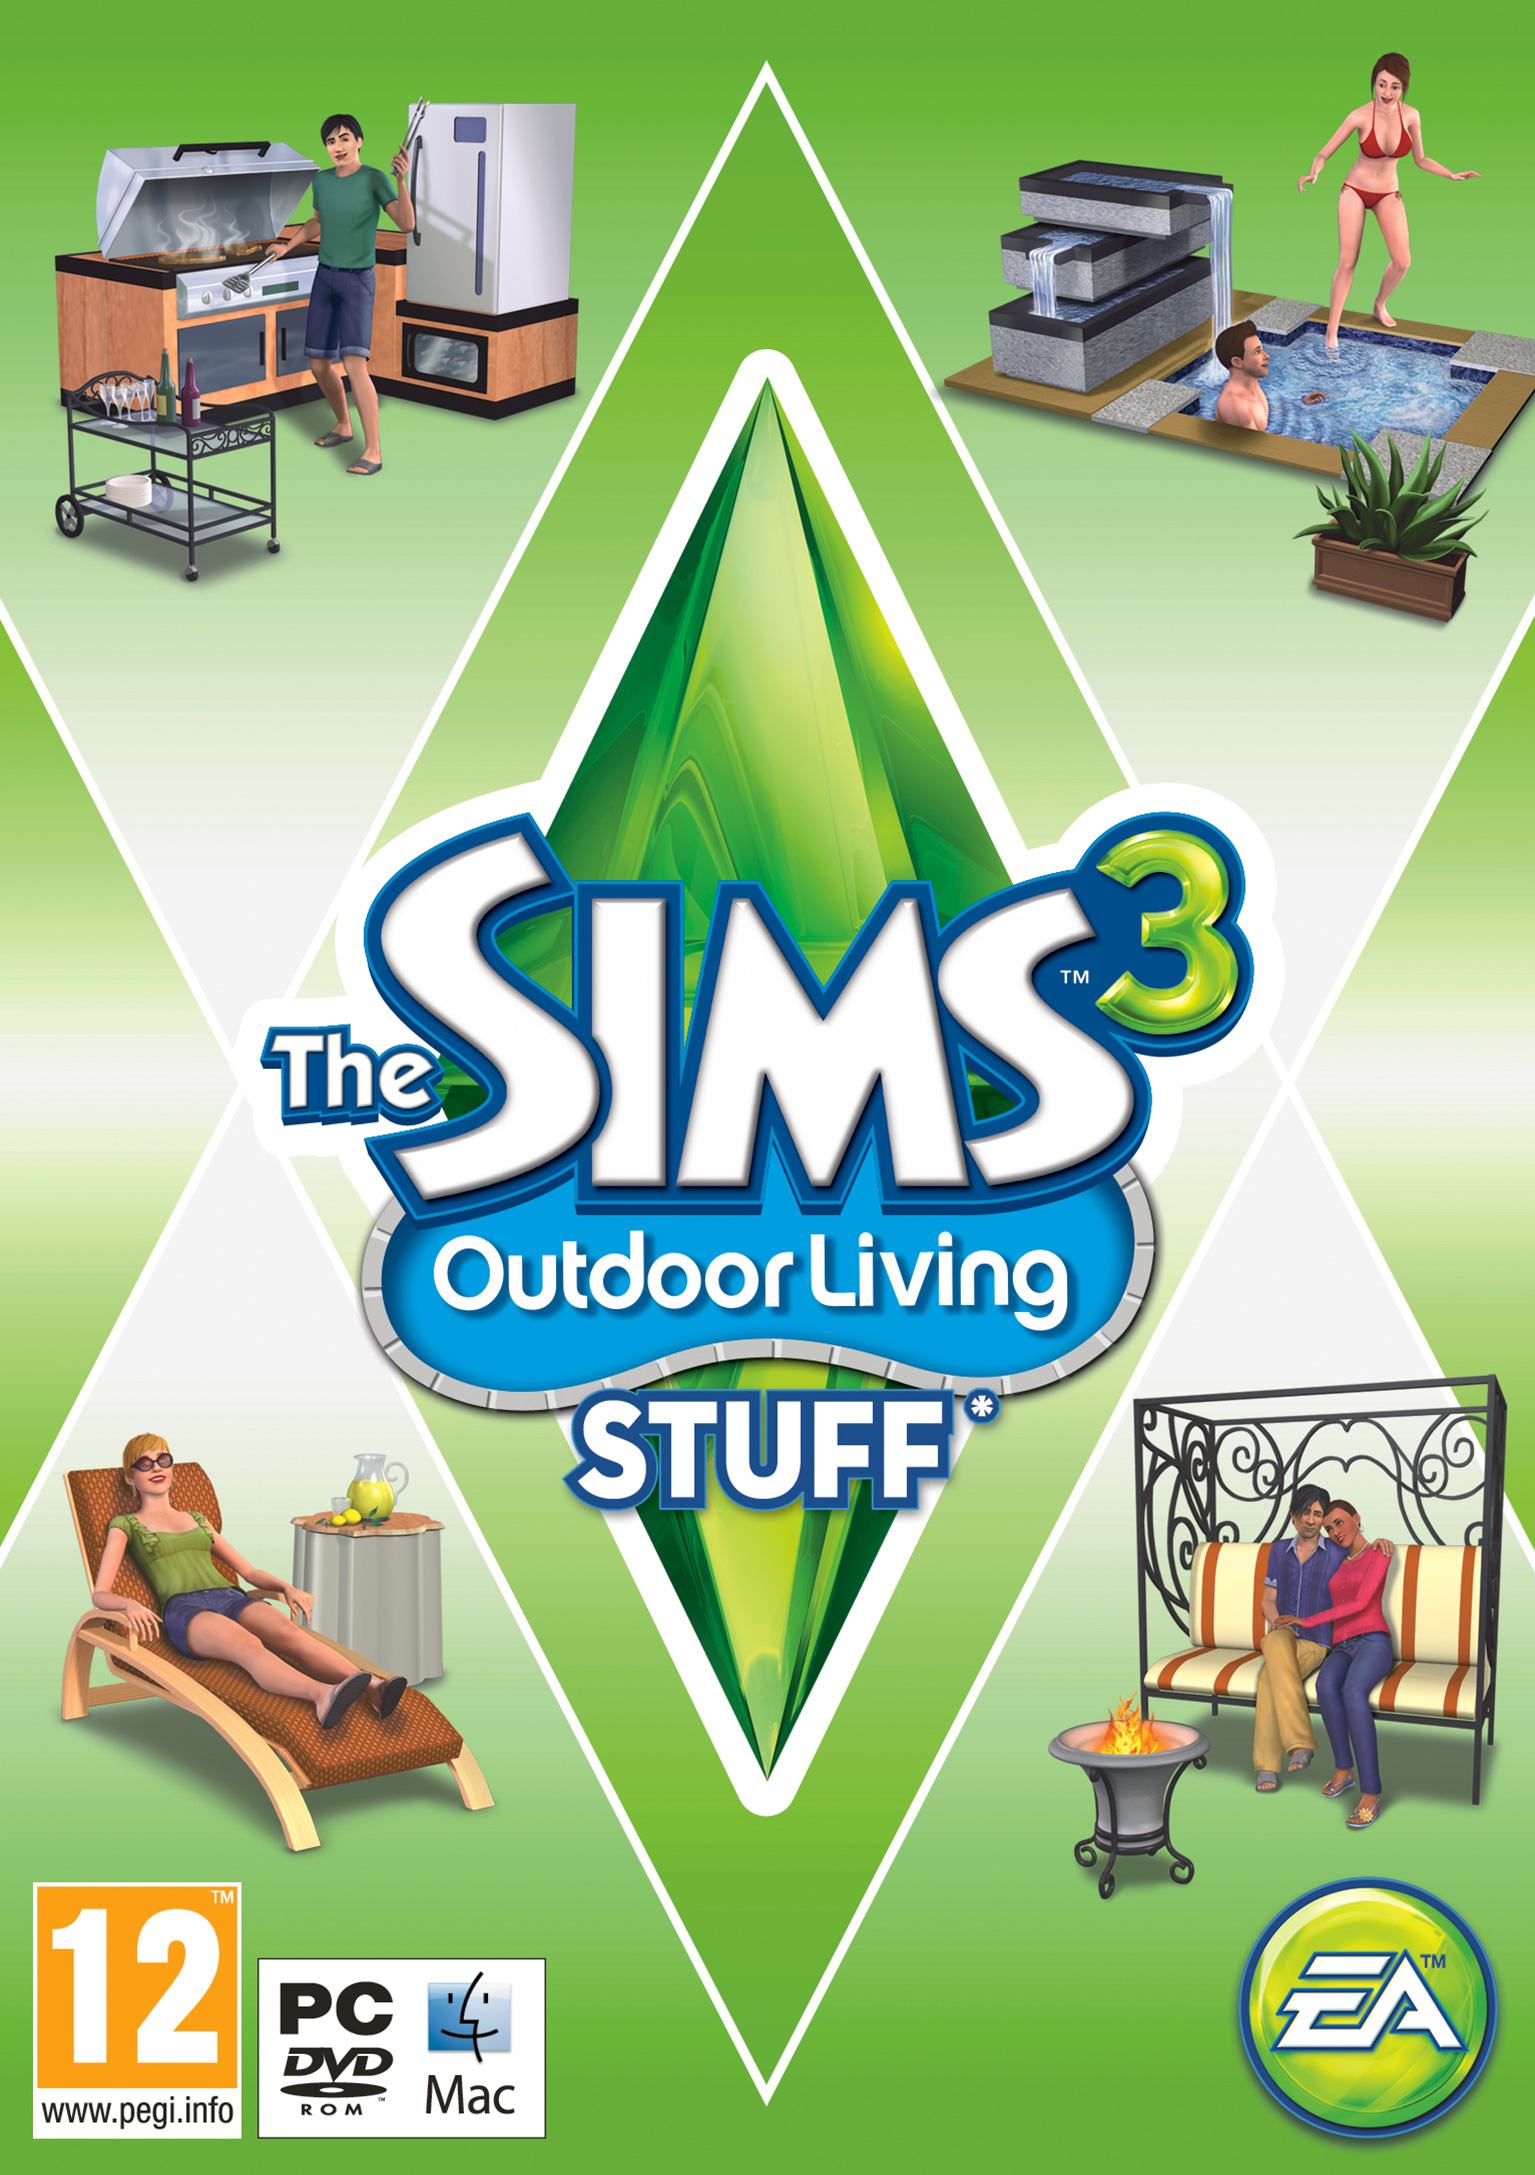 The Sims 3: Outdoor Living Stuff - predn DVD obal 2